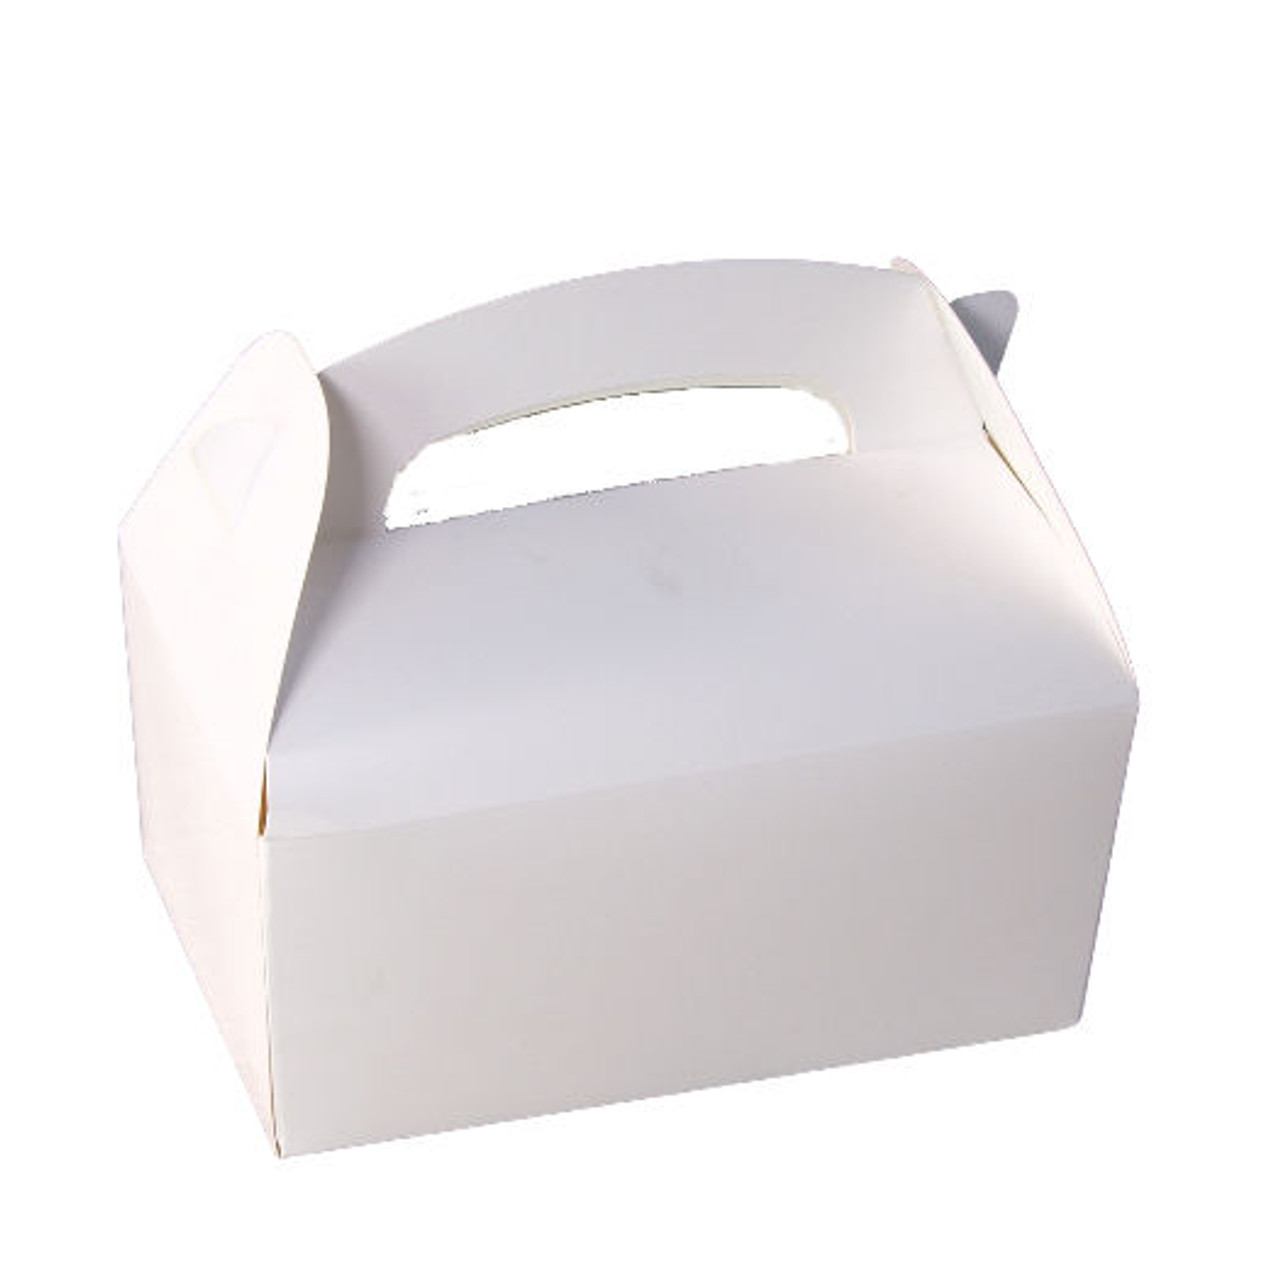 Case x 250 Childrens Cardboard meal boxes Small Plain White